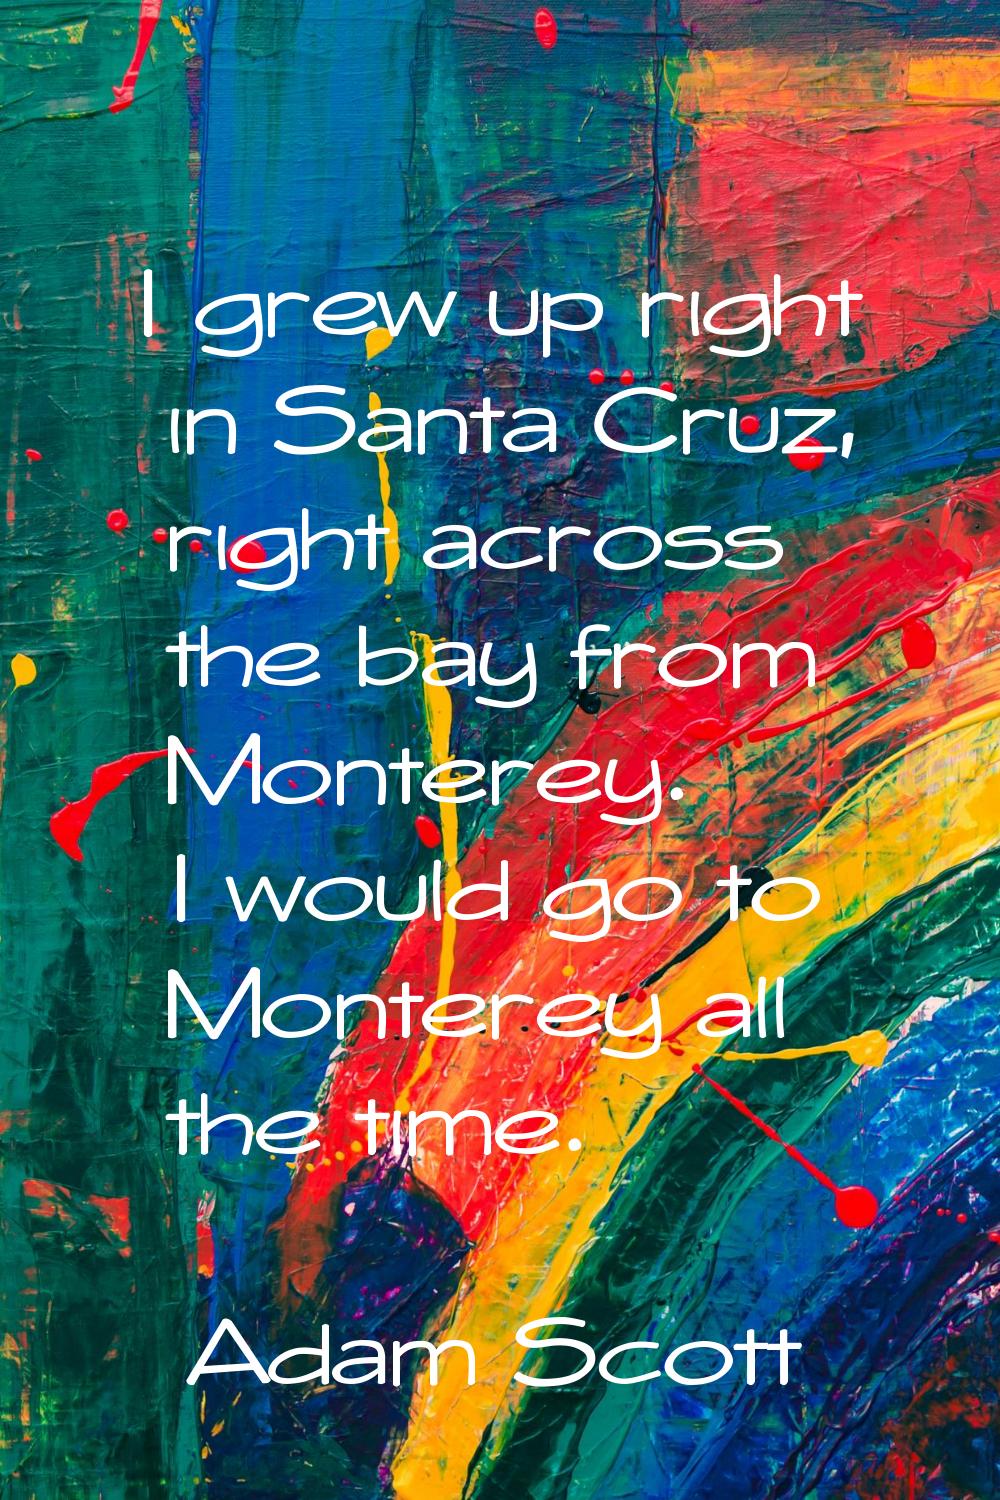 I grew up right in Santa Cruz, right across the bay from Monterey. I would go to Monterey all the t